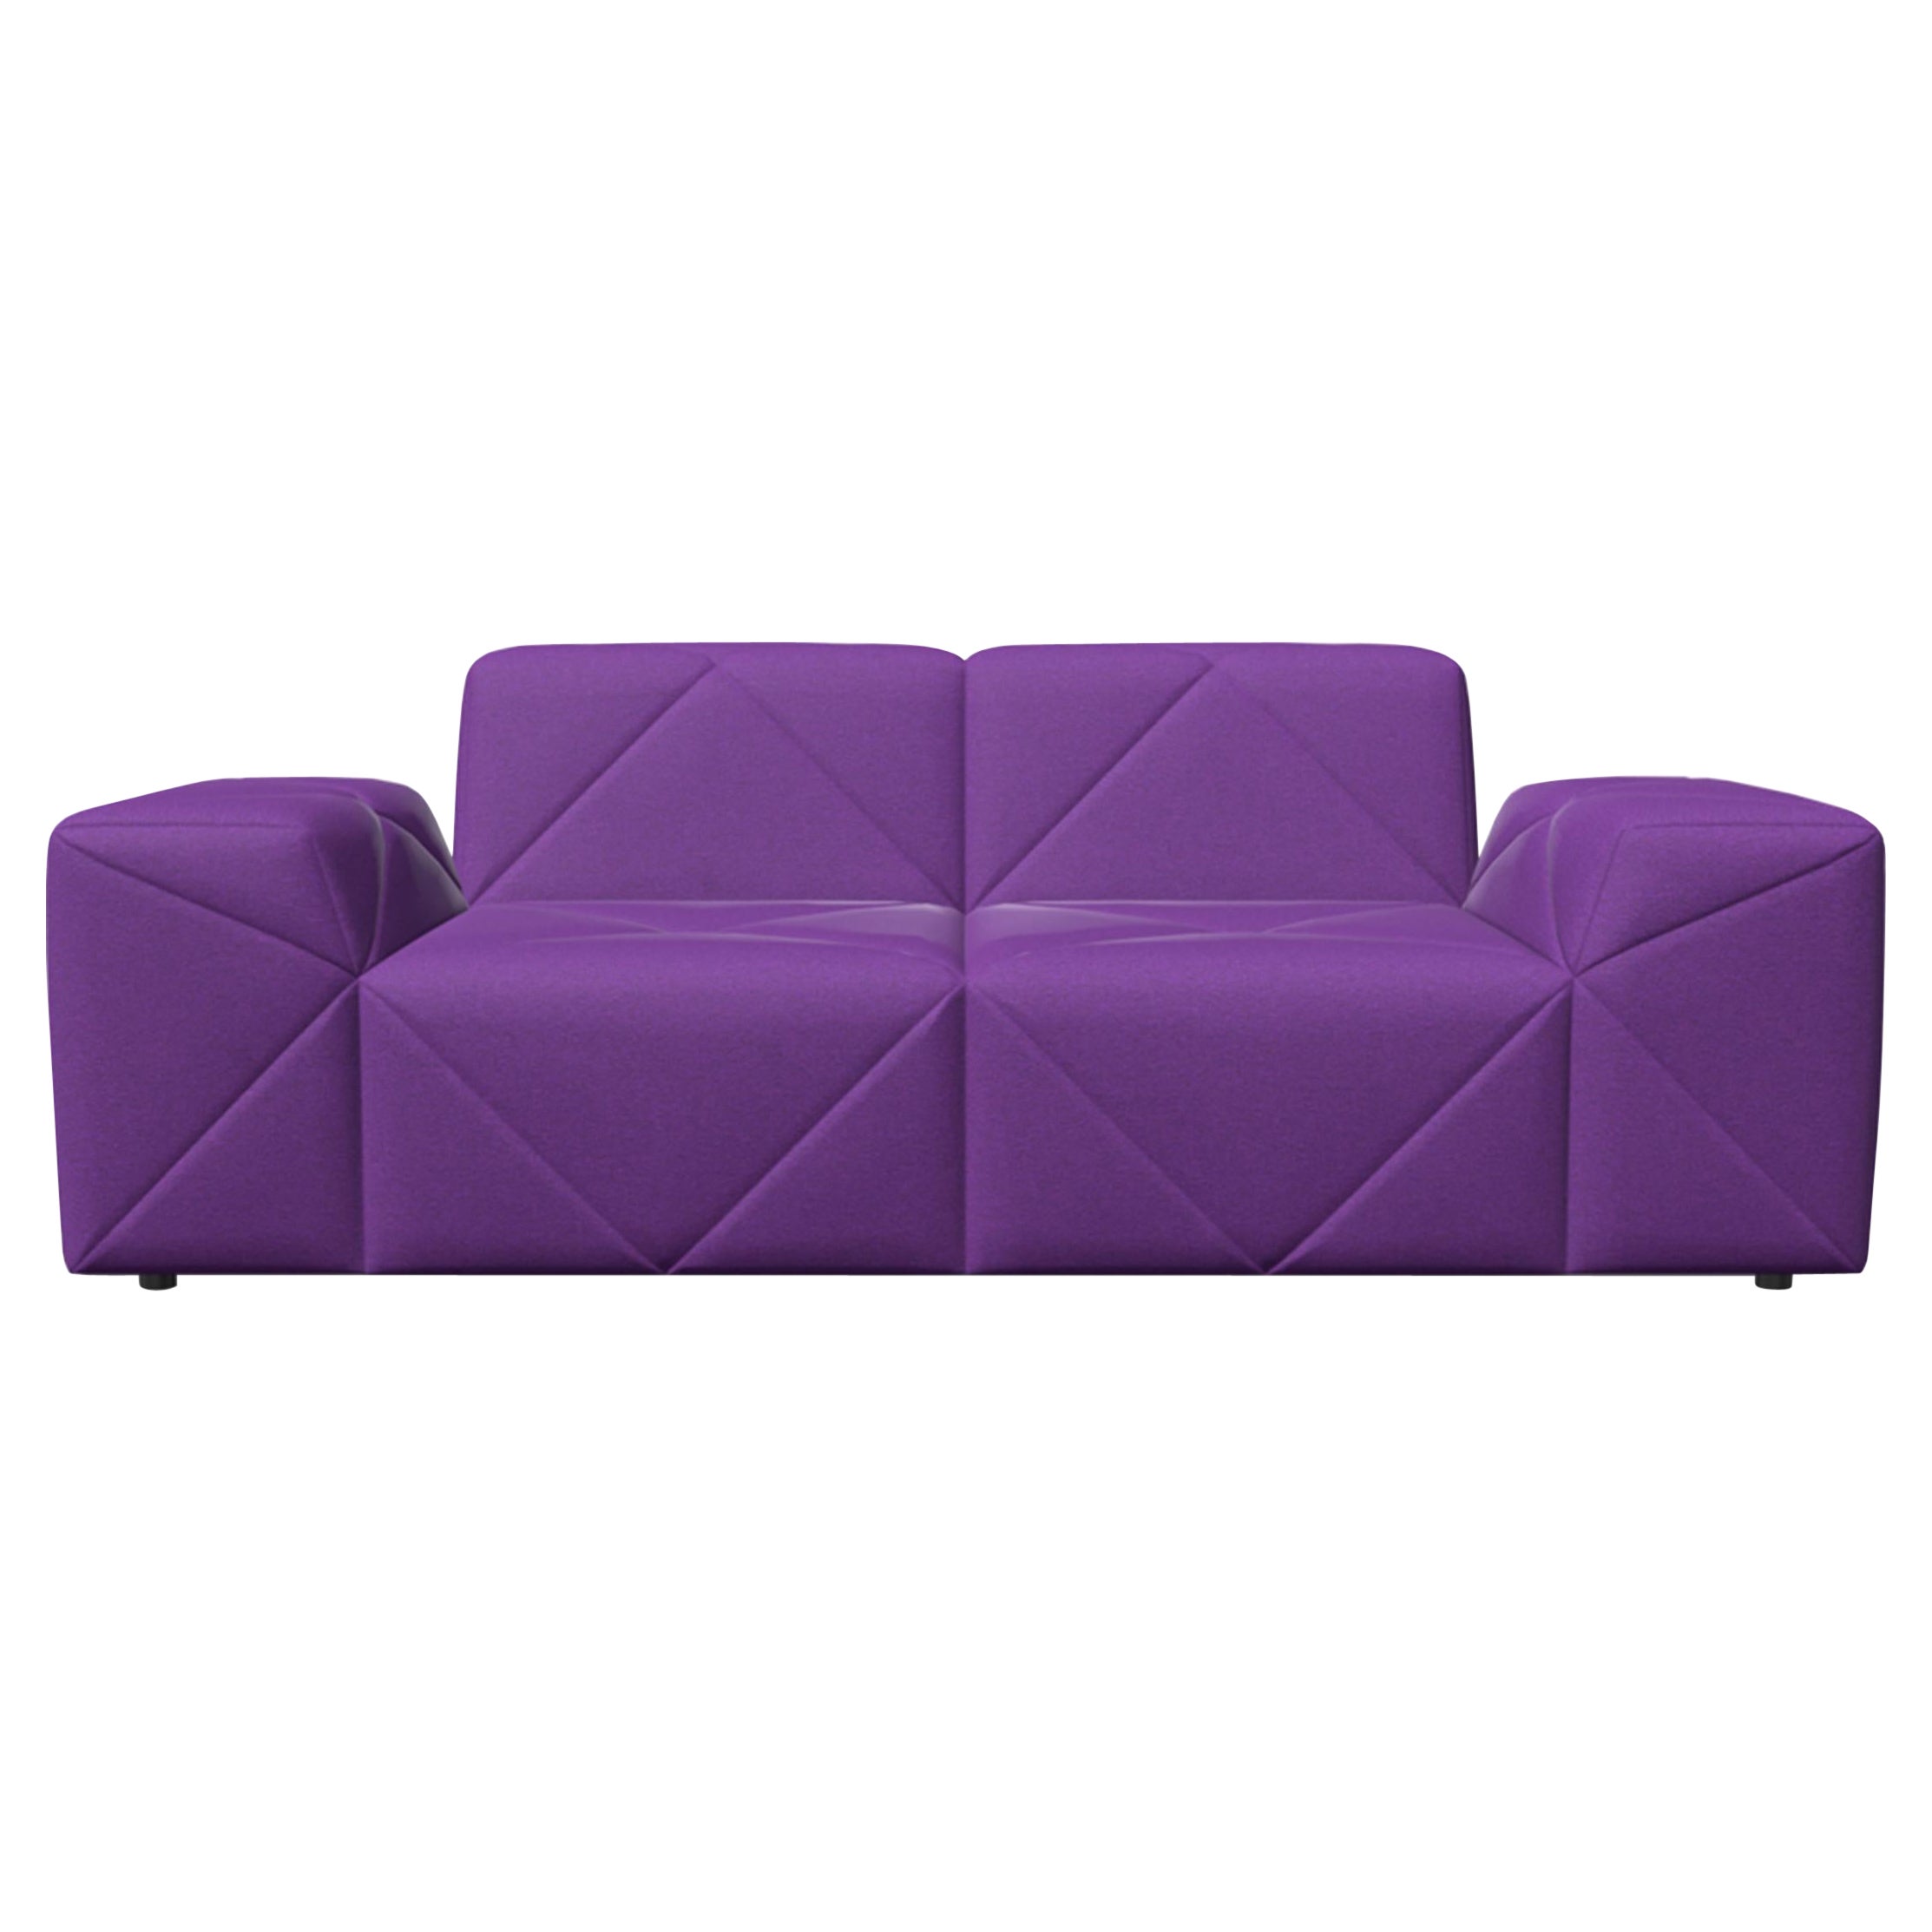 Moooi BFF Double Seater DE01 Low Sofa in Divina 3, 666 Purple Upholstery For Sale